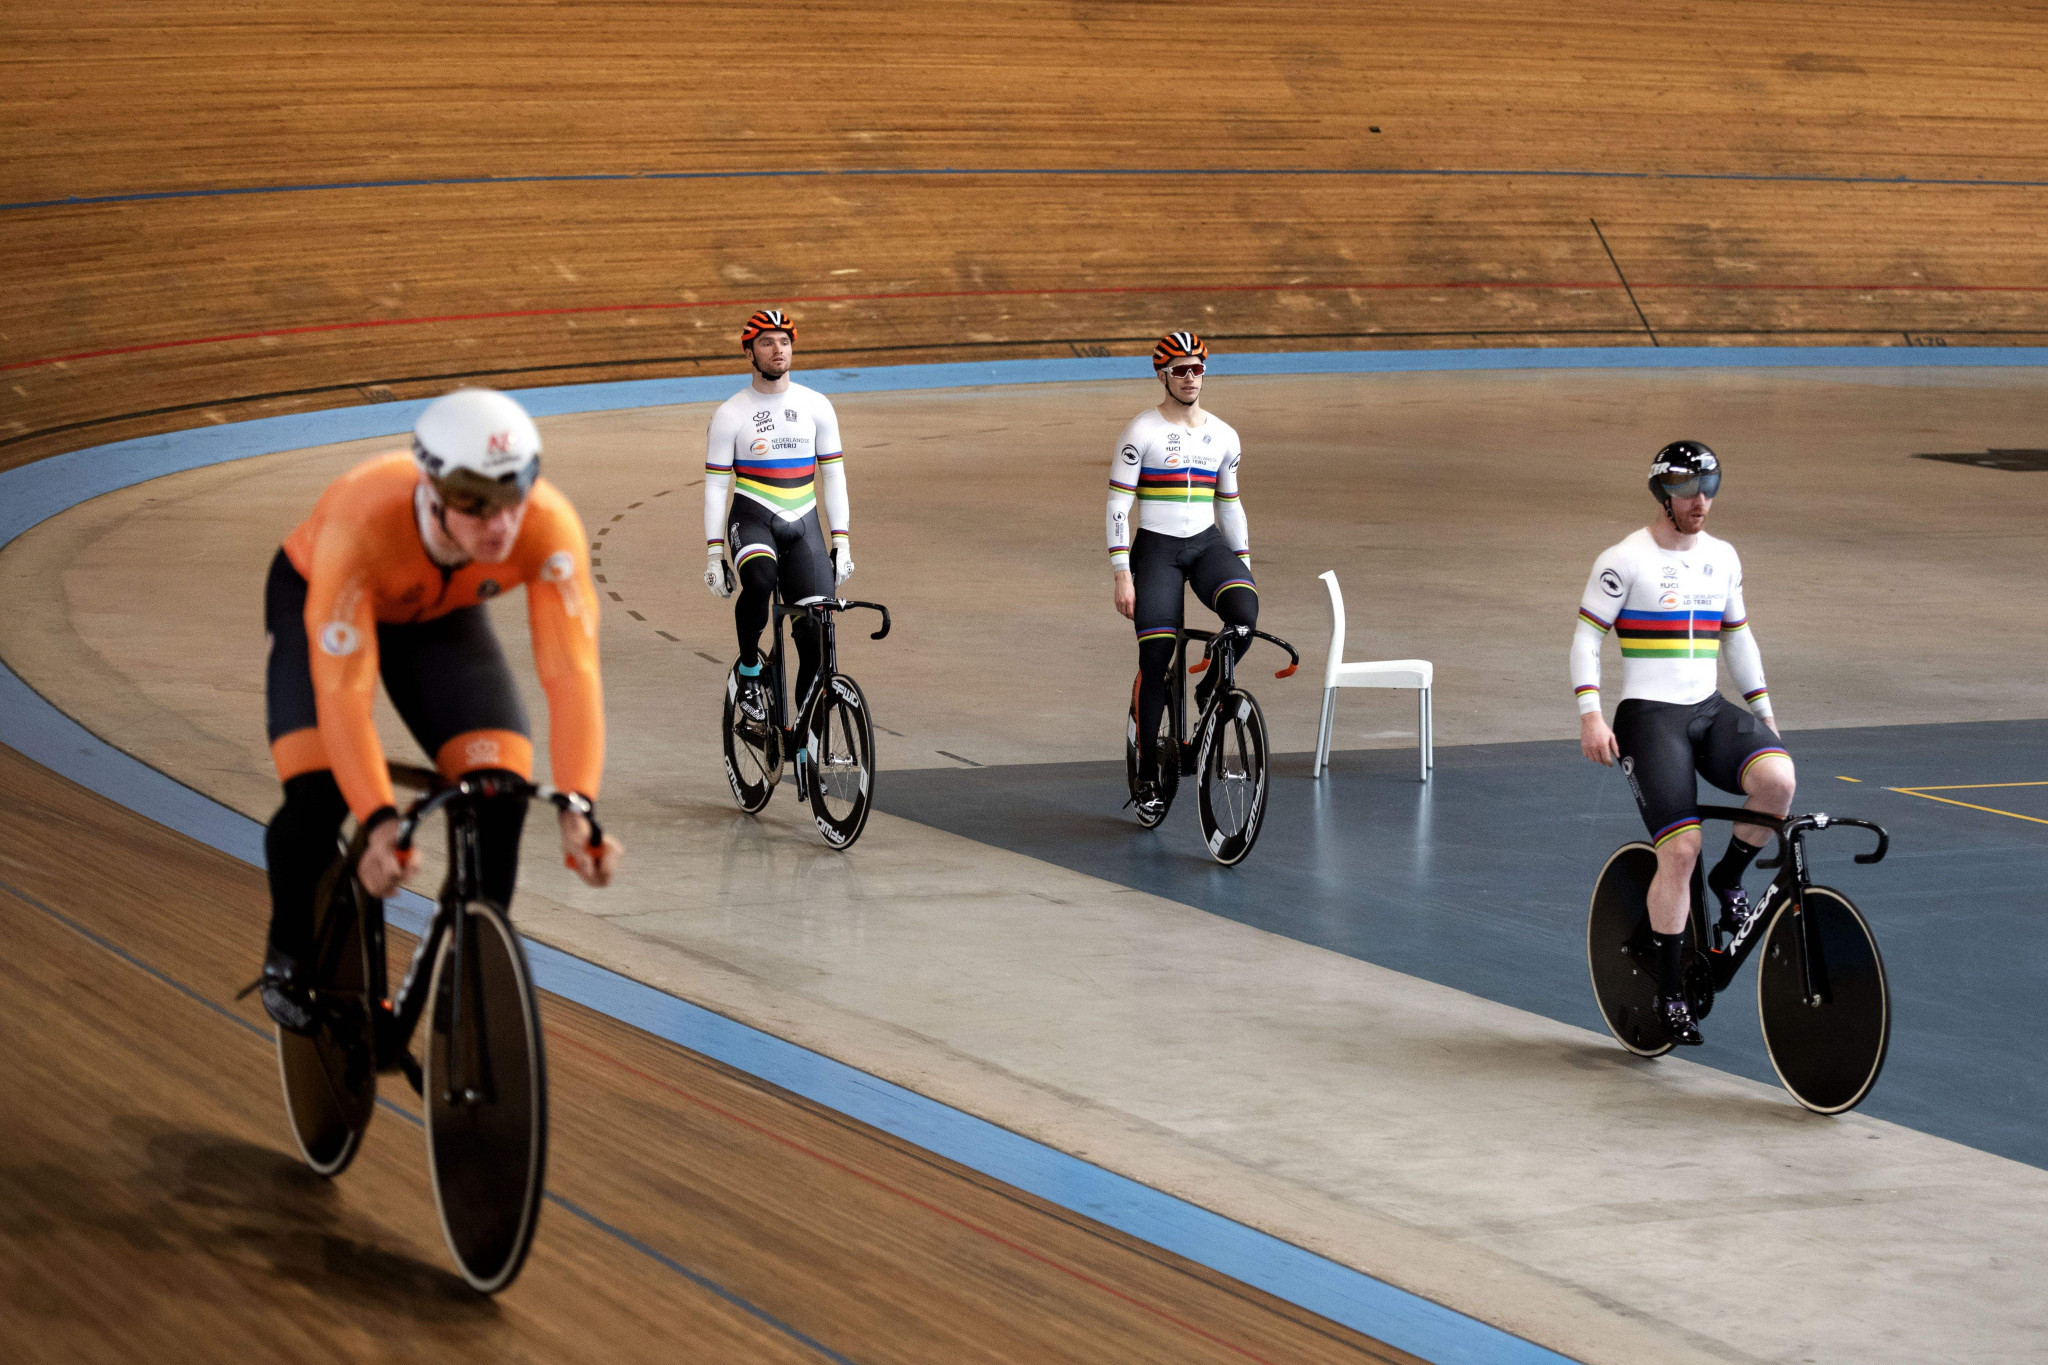 Berlin poised for UCI World Championships in final track test before Tokyo 2020